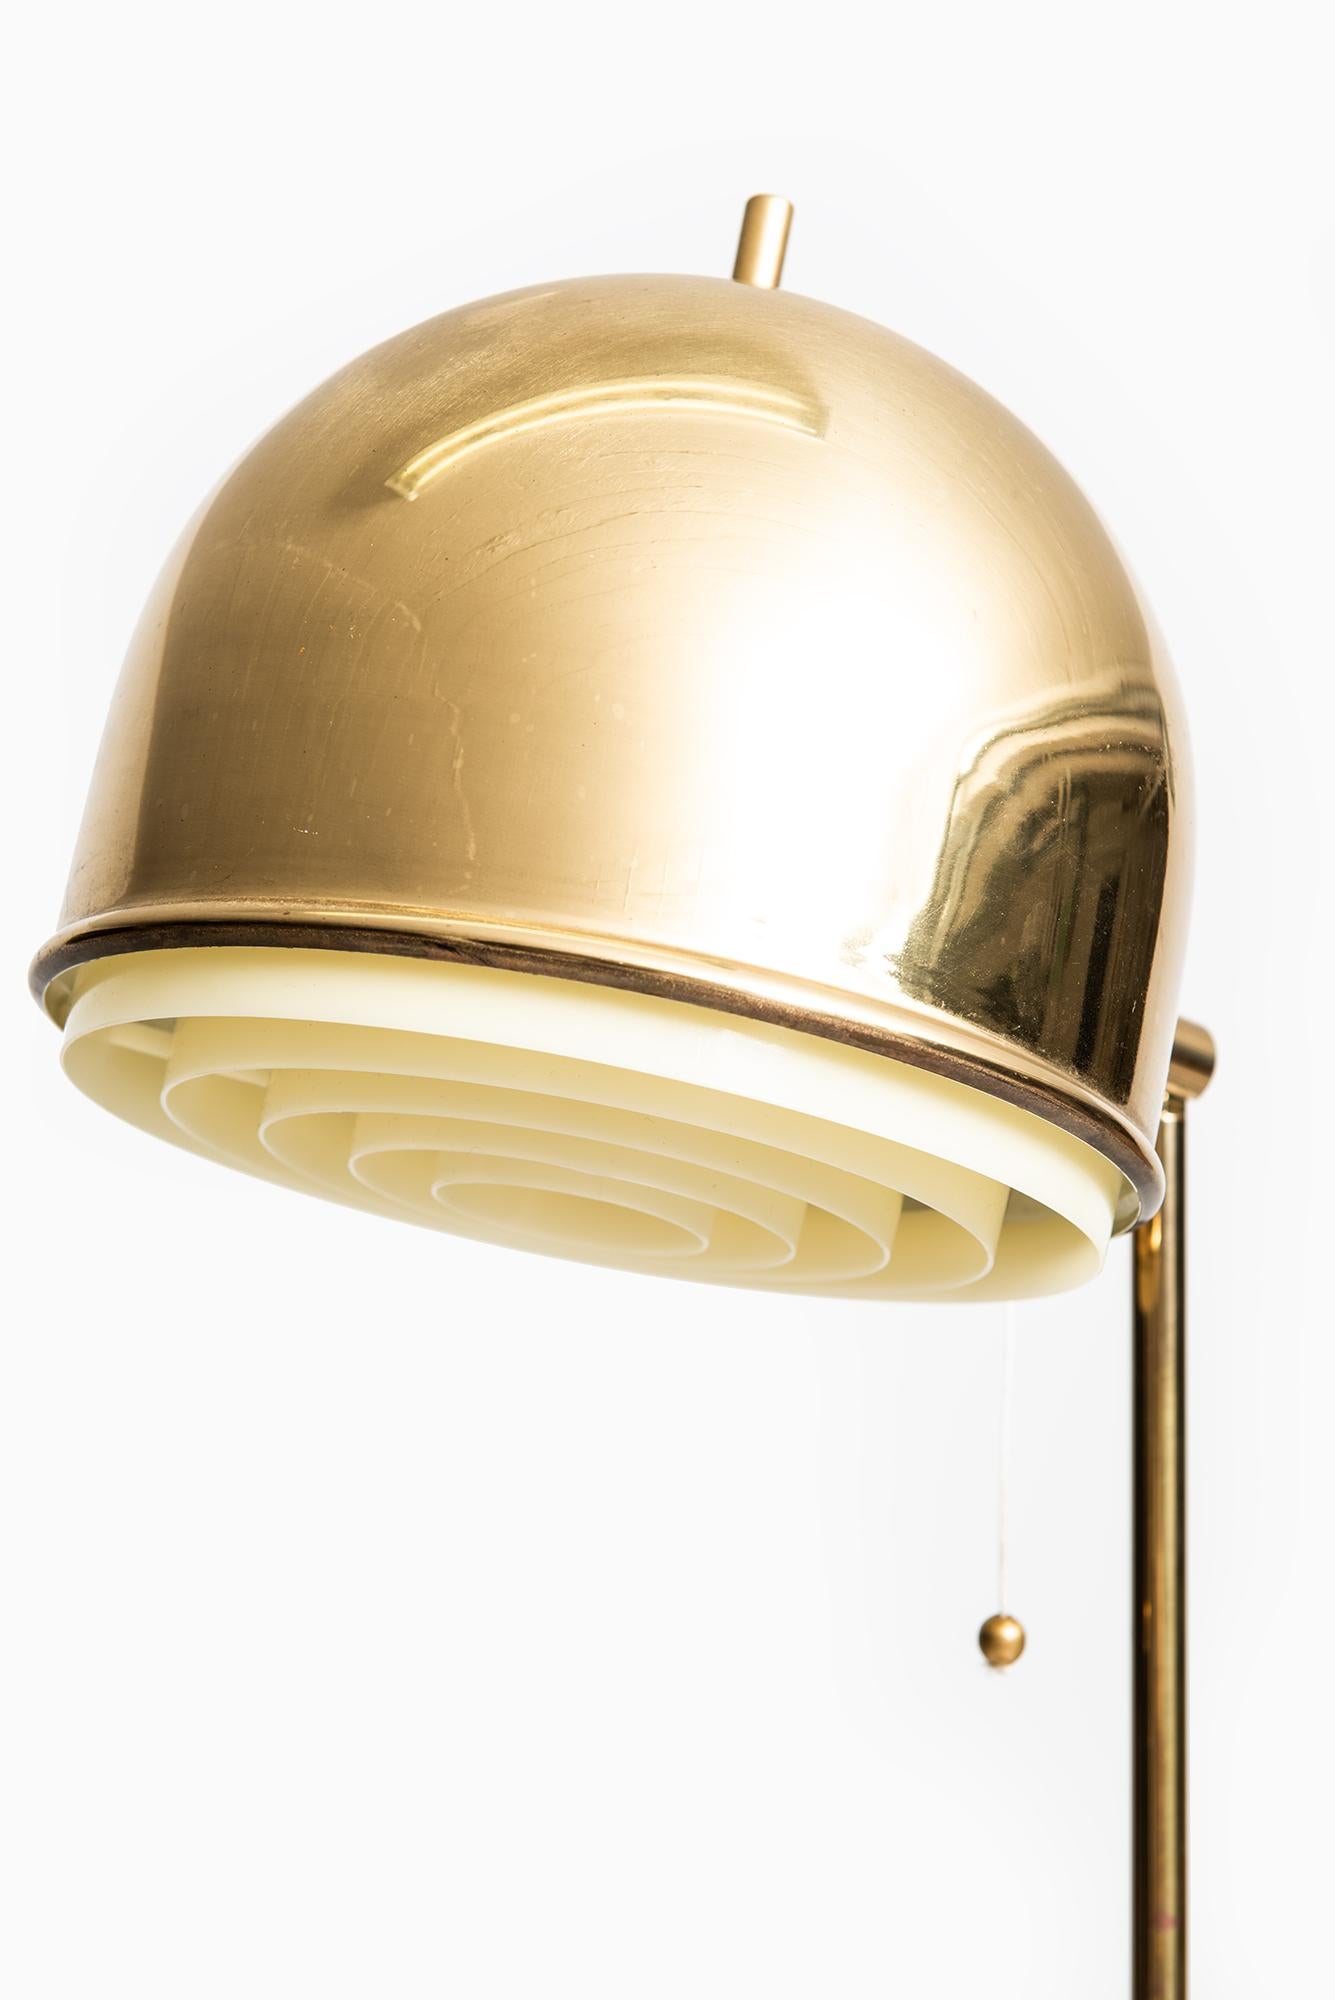 Swedish Table Lamp Model B-075 in Brass Produced by Bergbom in Sweden For Sale